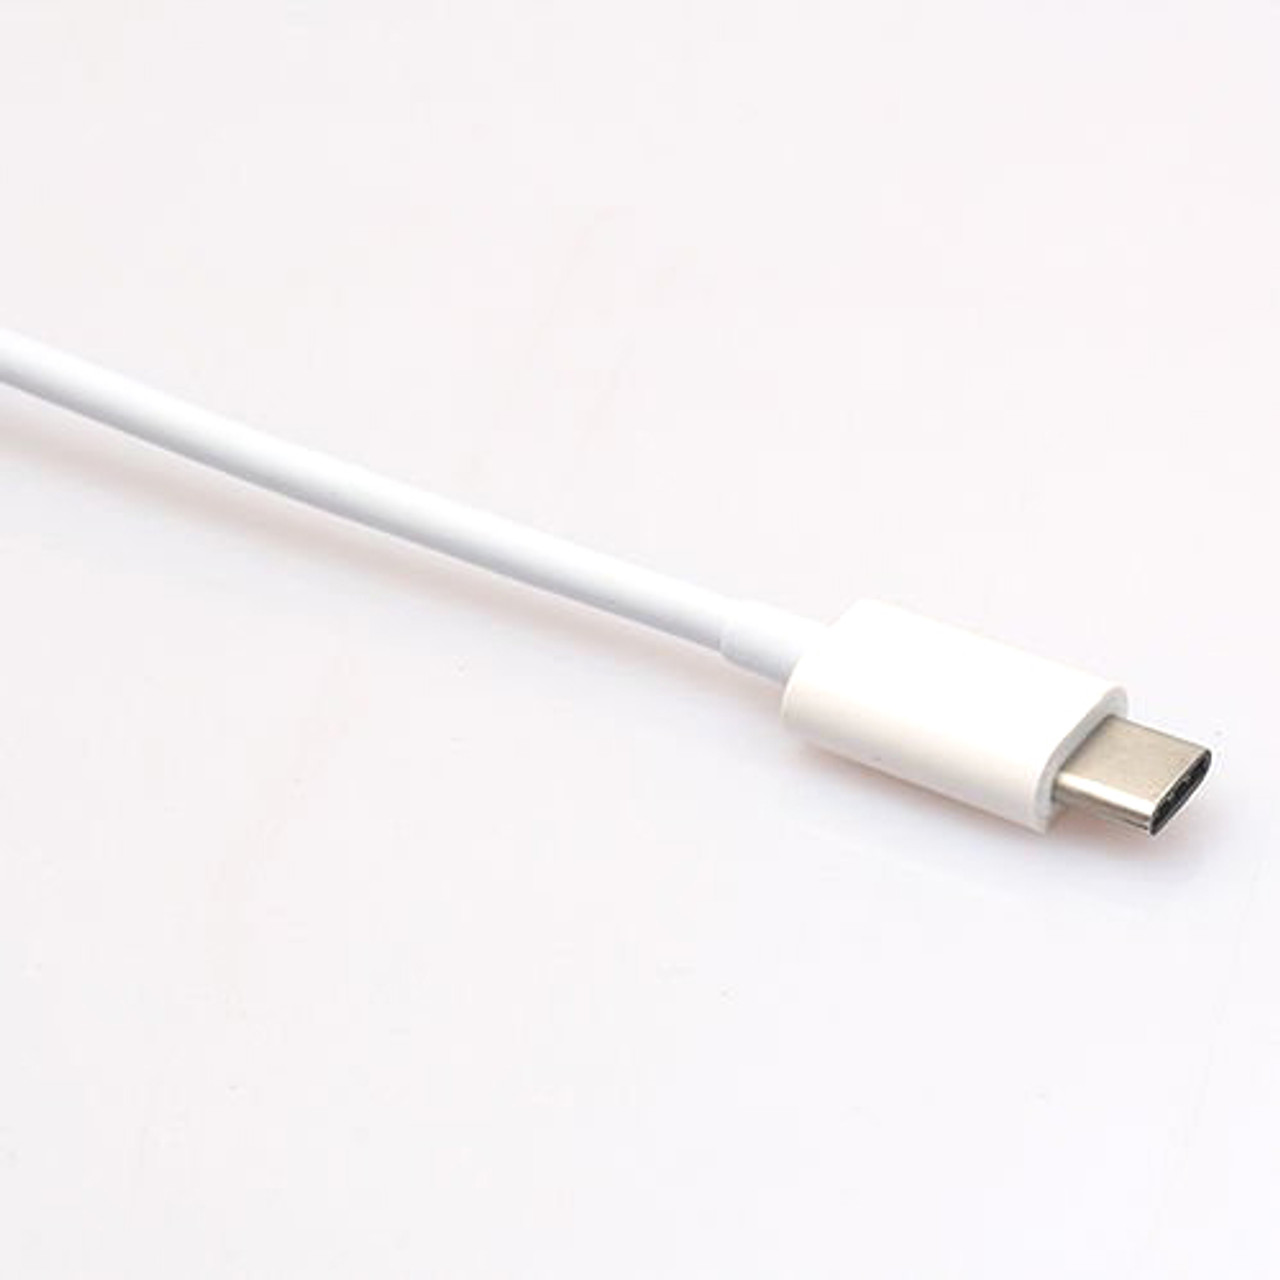 Powered USB-C Male to USB Type-A Female OTG Adapter Cable With USB Power Supply